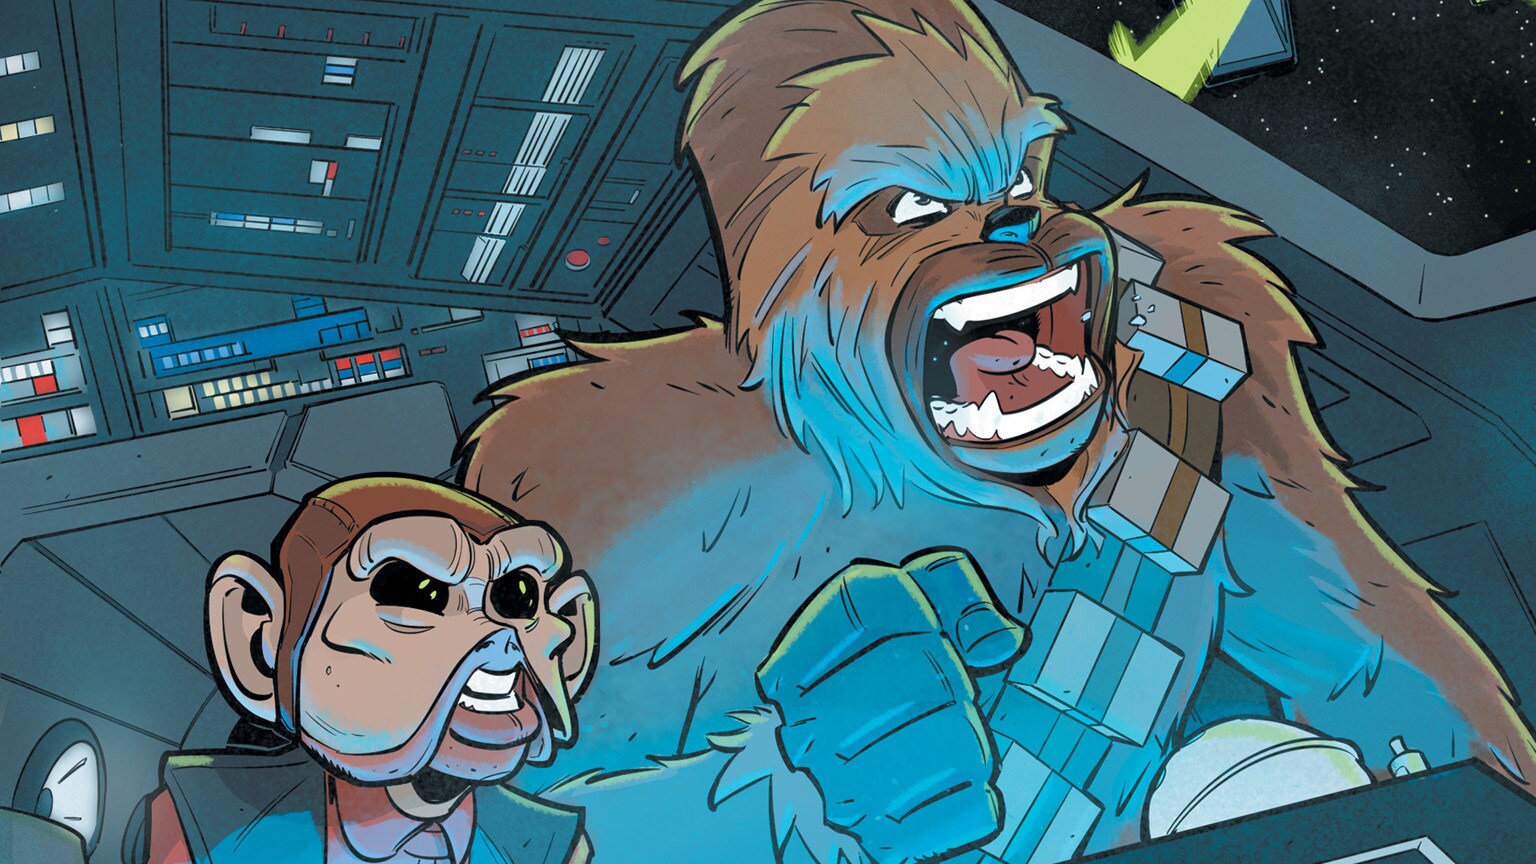  Star Wars Adventures #27 Gives the Mighty Chewbacca a Wookiee Welcome - Exclusive